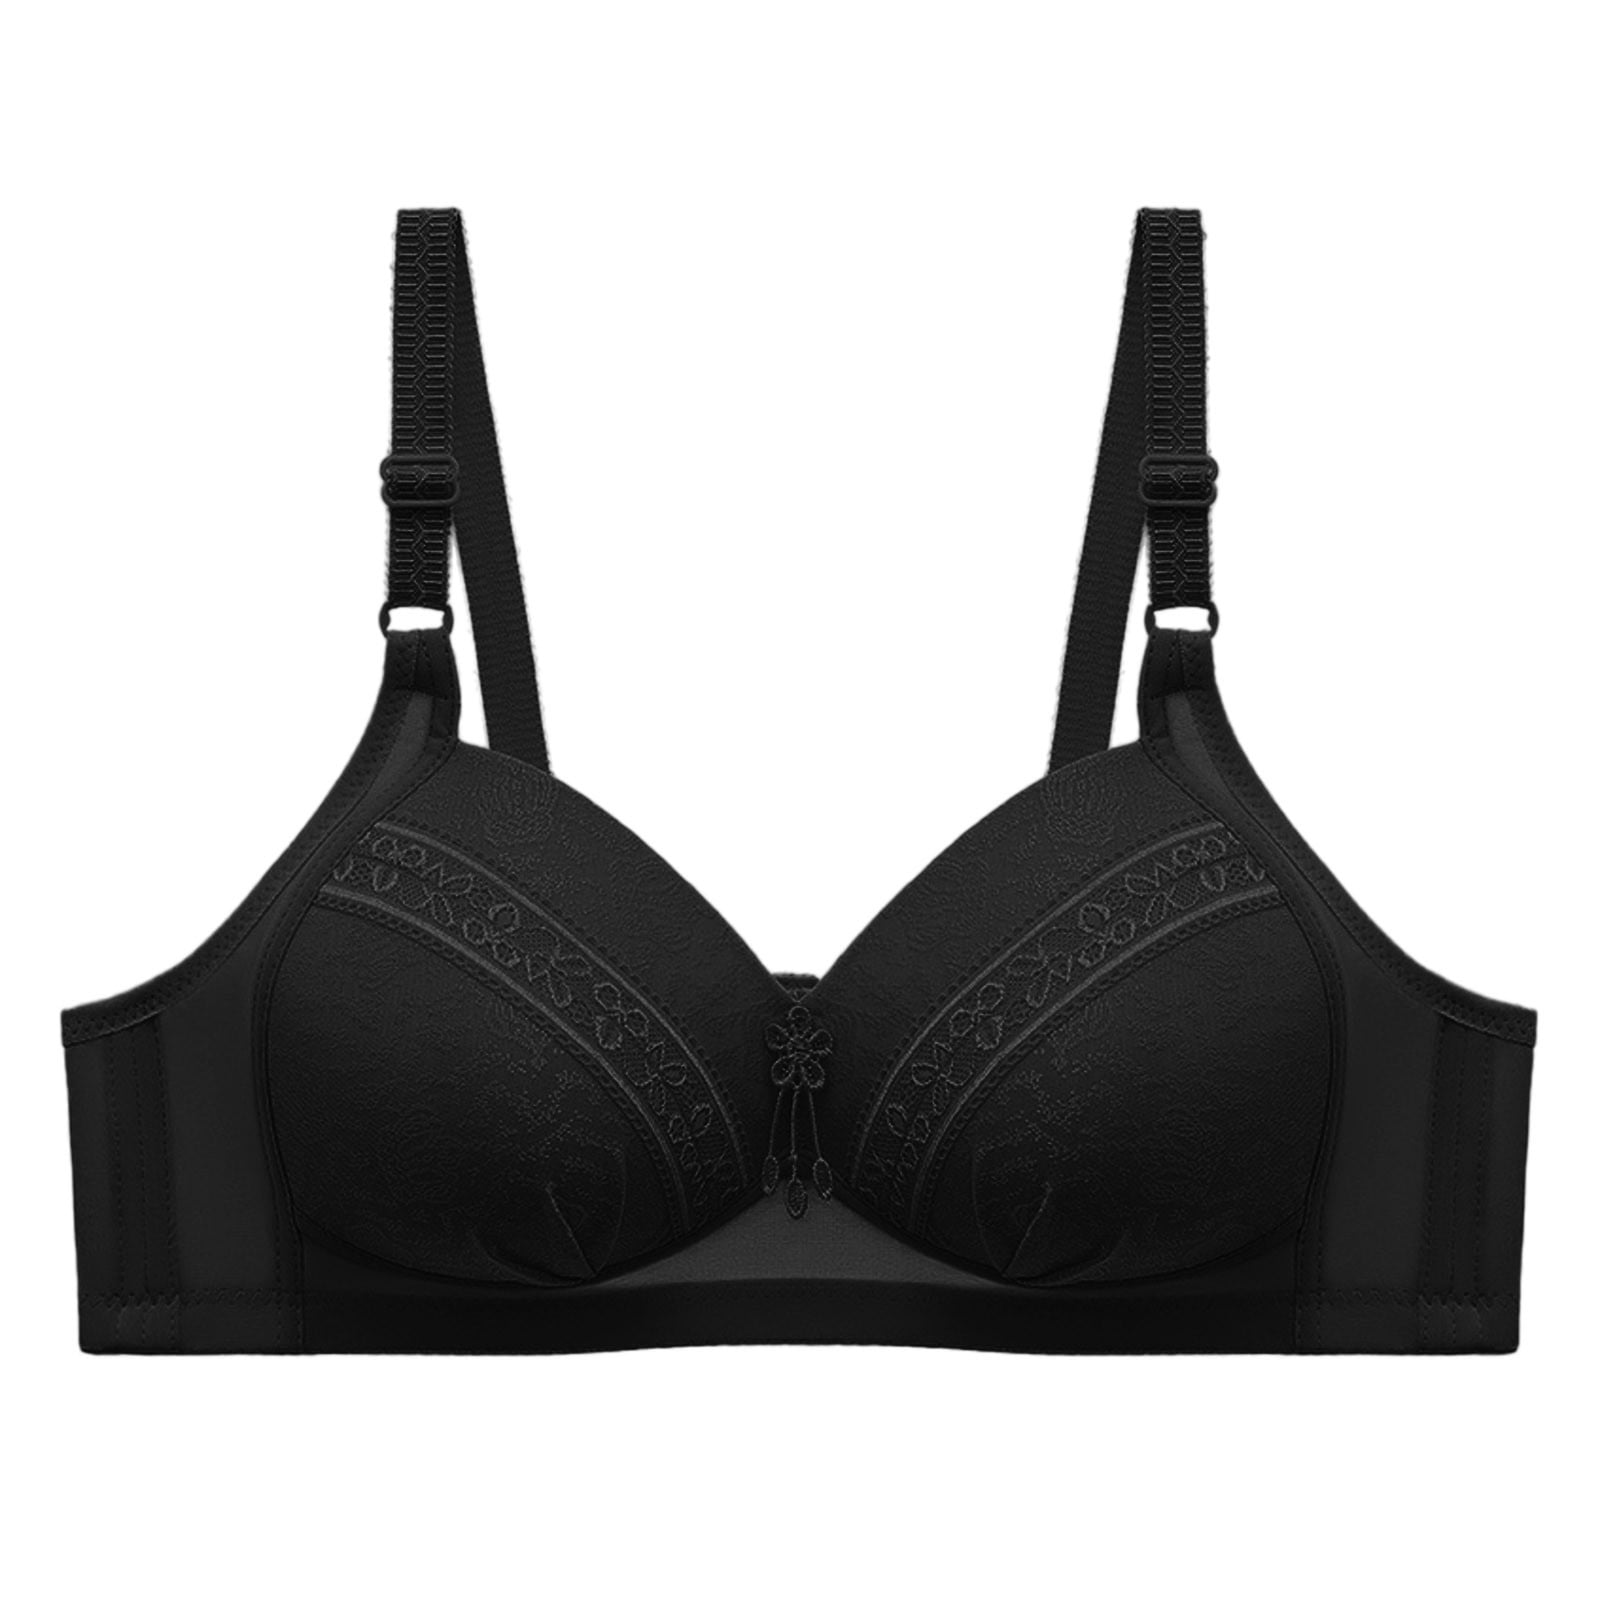 CAICJ98 Women'S Lingerie Women's Non Padded Minimizer Bra Full Coverage  Plus Size Support Everyday Bras Seamless Wirefree Black,38/85B